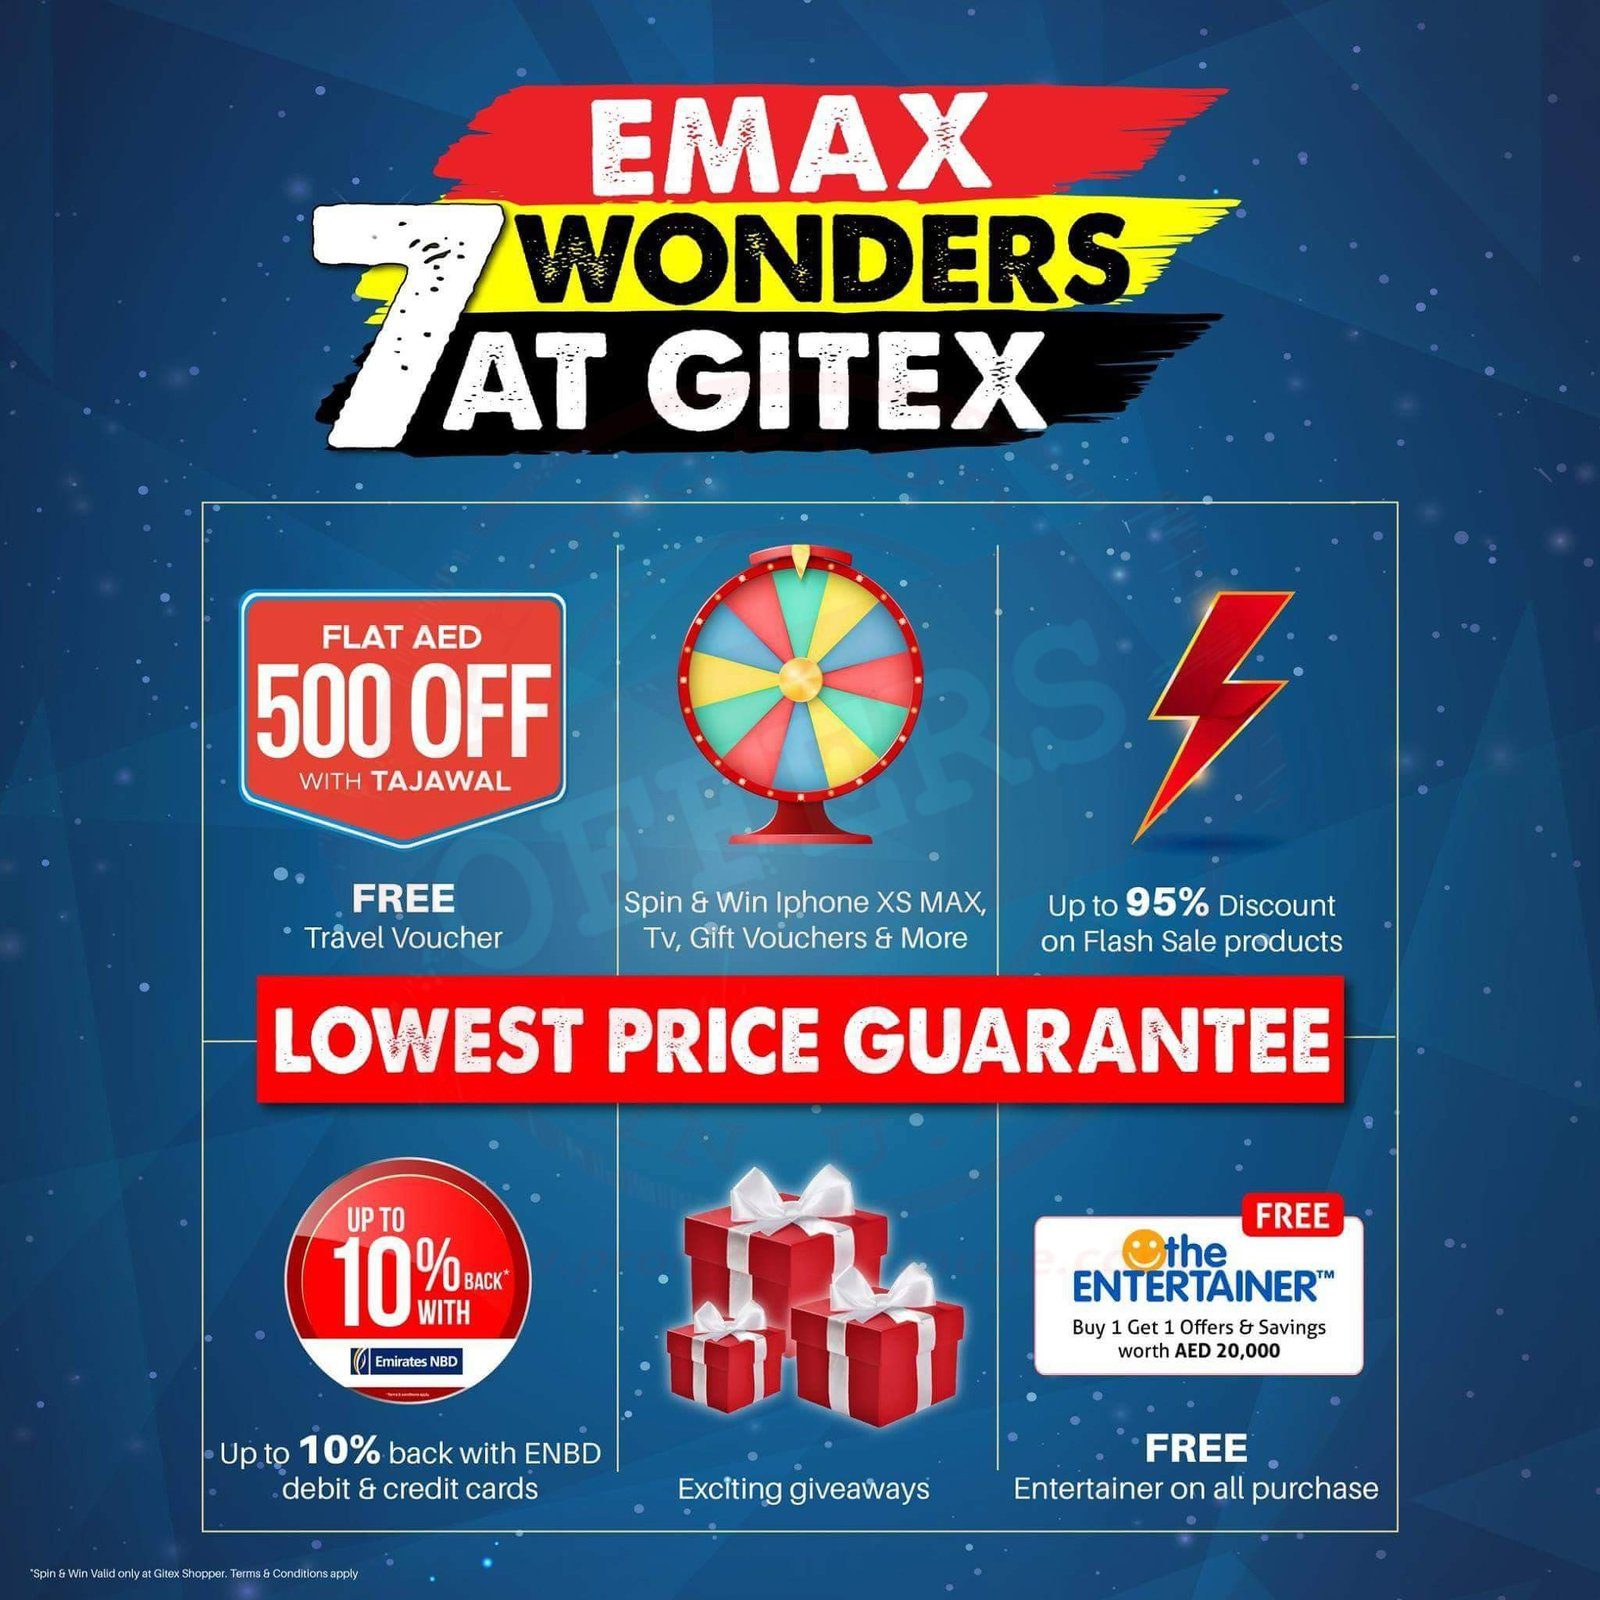 FB IMG 1538491461023 The Emax 7 wonders are here to amaze you this Gitex! Visit the Emax stand @ Gitex Shopper or any of Emax stores to grab these unbeatable market deals!